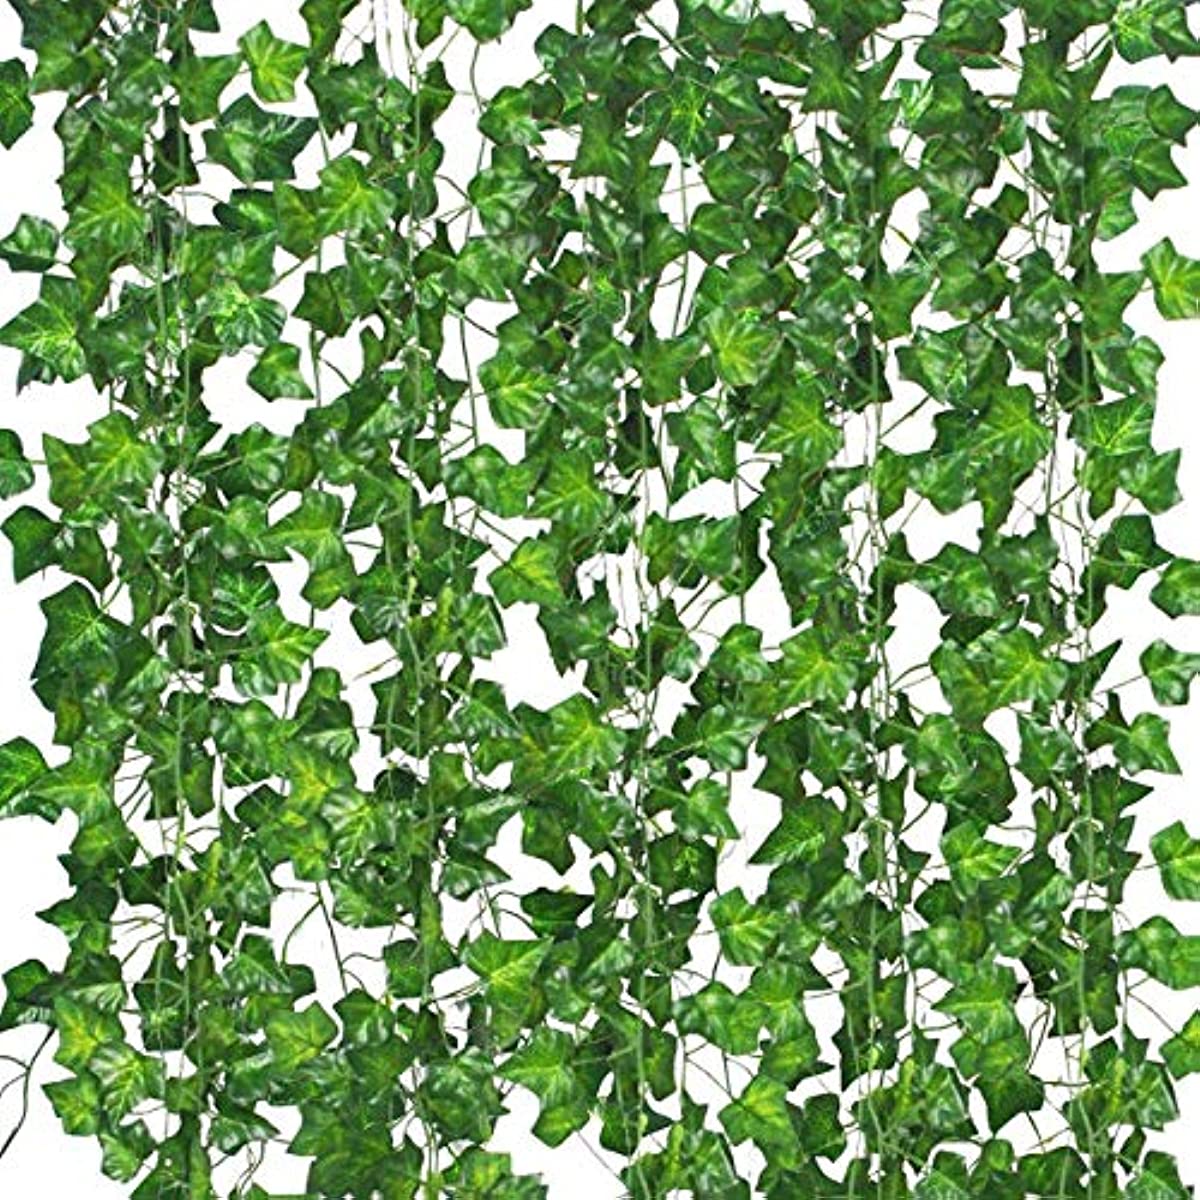 Comtelek 12 Pack Fake Vines for Room Decor Artificial Ivy Garland with Clip Green Flowers Hanging Plants Faux Greenery Leaves Bedroom Aesthetic Decor